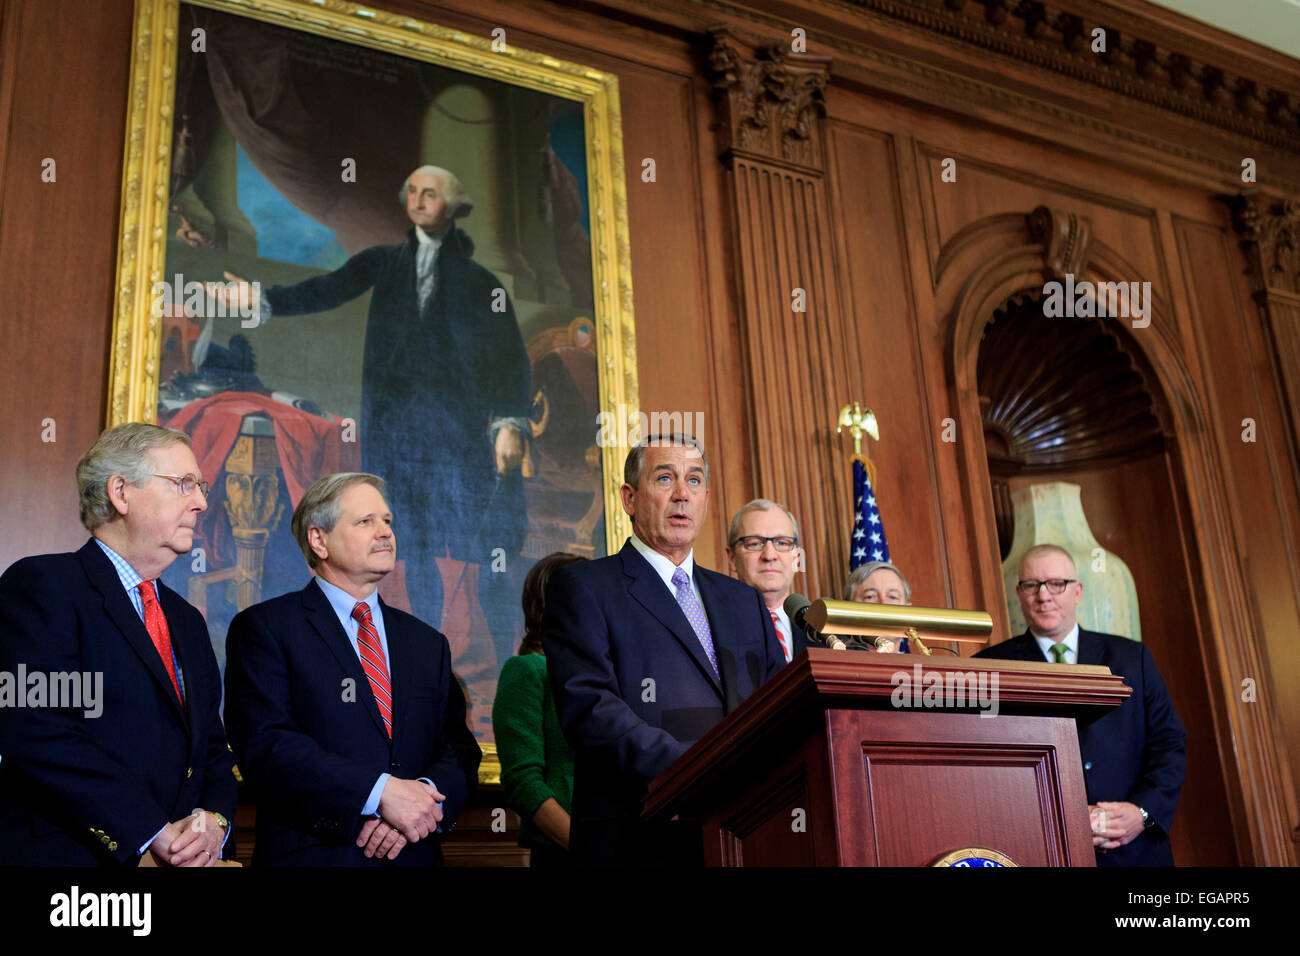 US Speaker of the House John Boehner speaks during a signing ceremony for the bill approving the Keystone XL pipeline project at the U.S. Capitol February 10, 2015 in Washington, DC. Also pictured: Majority Leader Mitch McConnell, Senator John Hoeven, Representative Kristi Noem, Representative Kevin Cramer, Representative Fred Upton, and Sean McGarvey, president of North America's Building Trades Unions. Stock Photo